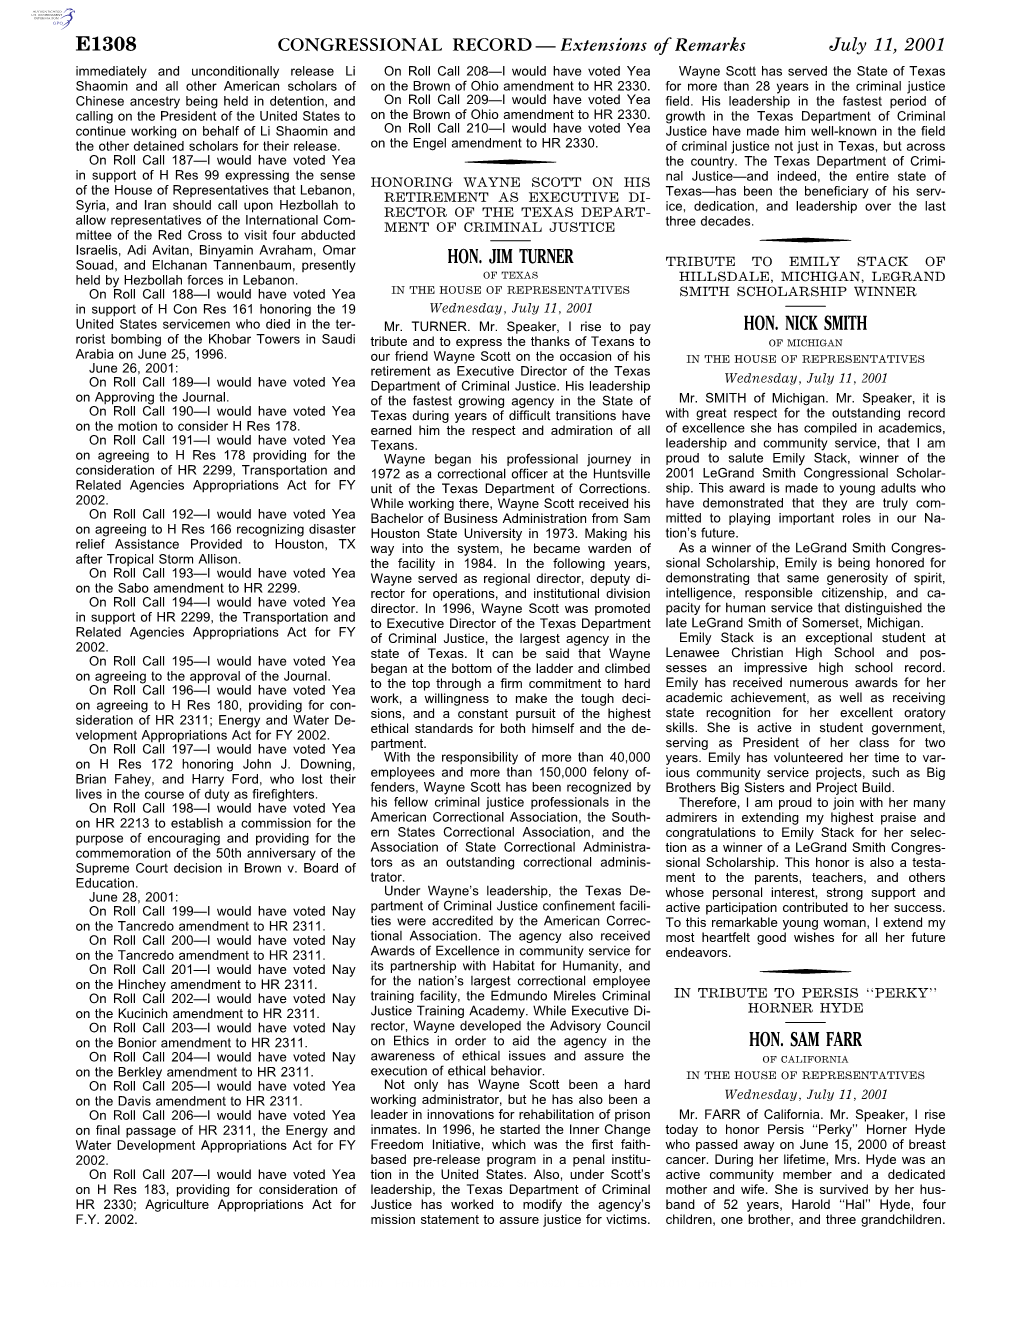 CONGRESSIONAL RECORD— Extensions of Remarks E1308 HON. JIM TURNER HON. NICK SMITH HON. SAM FARR